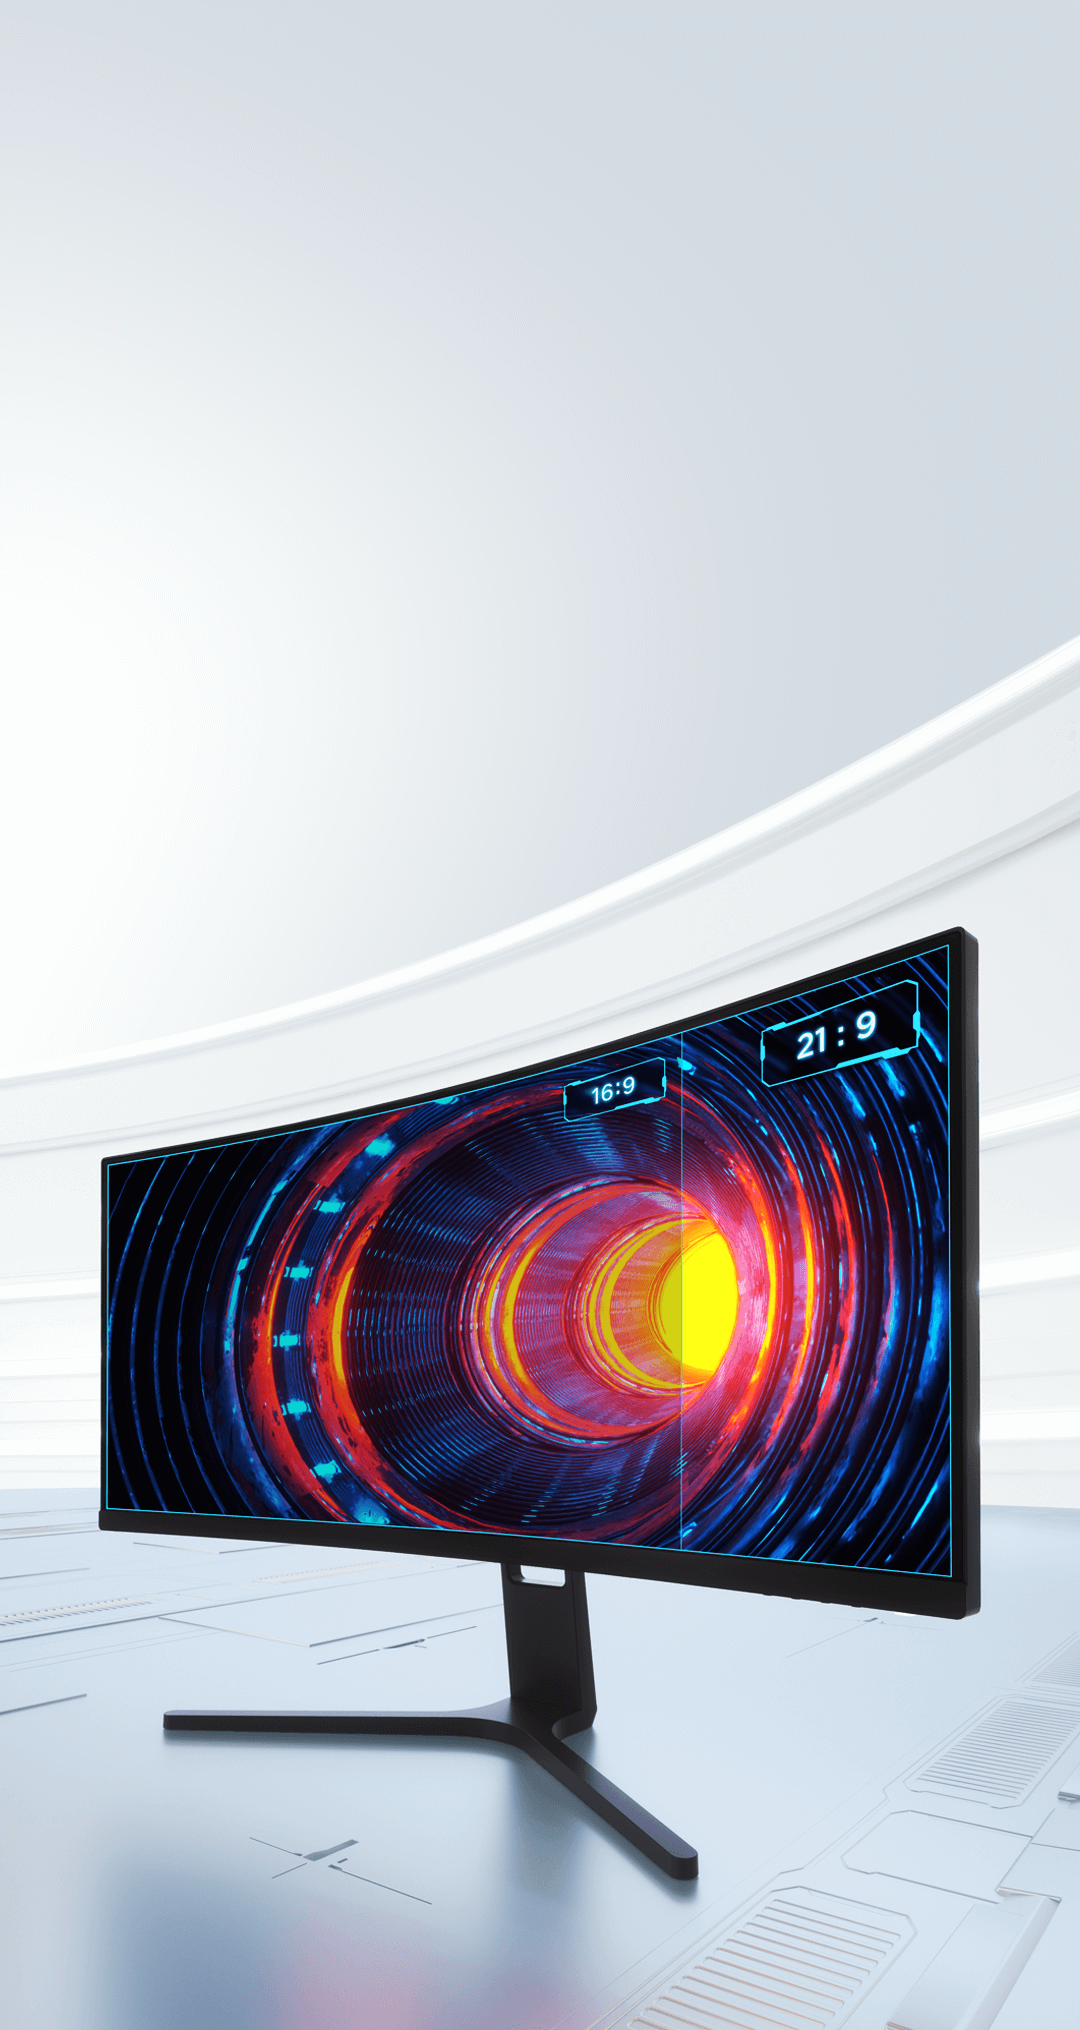 Redmi curved gaming. 30" Монитор Xiaomi Redmi Curved display. Xiaomi Curved display 30 200hz. Монитор Xiaomi Redmi Curved display 30" Black. Xiaomi Curved Gaming Monitor 30.